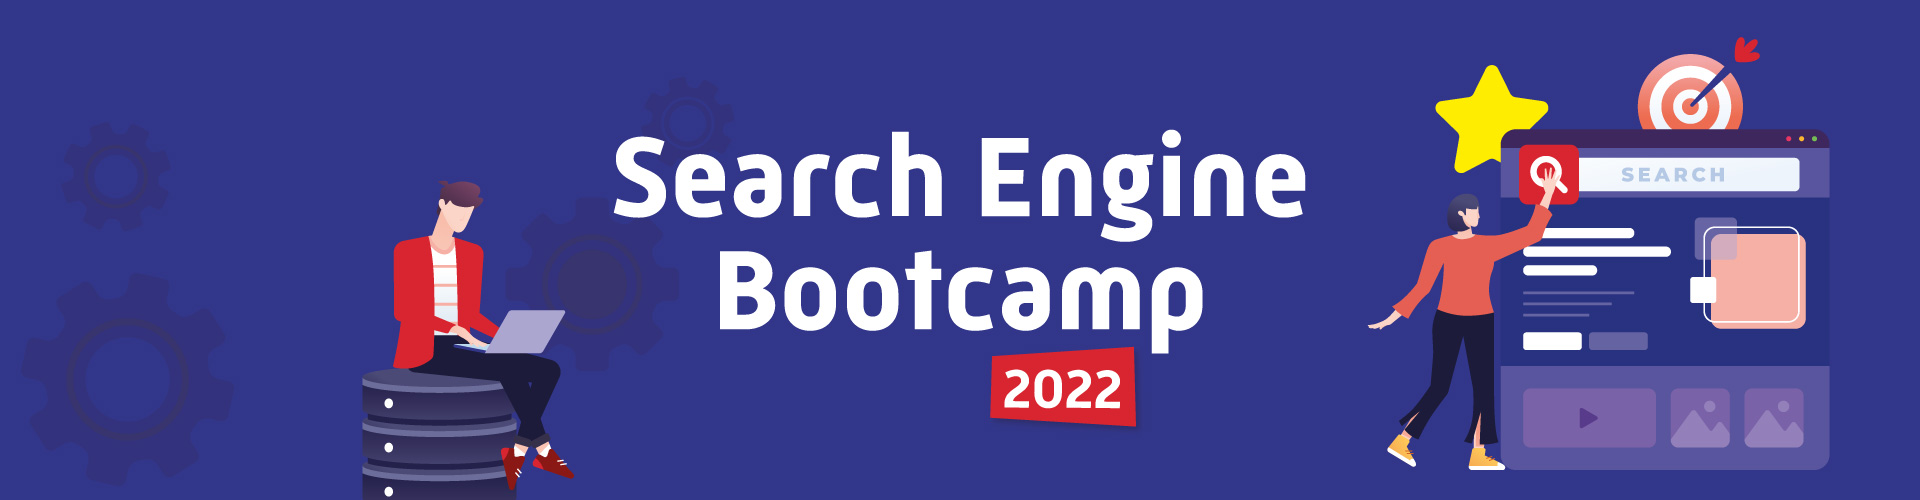 Search Engine Bootcamp